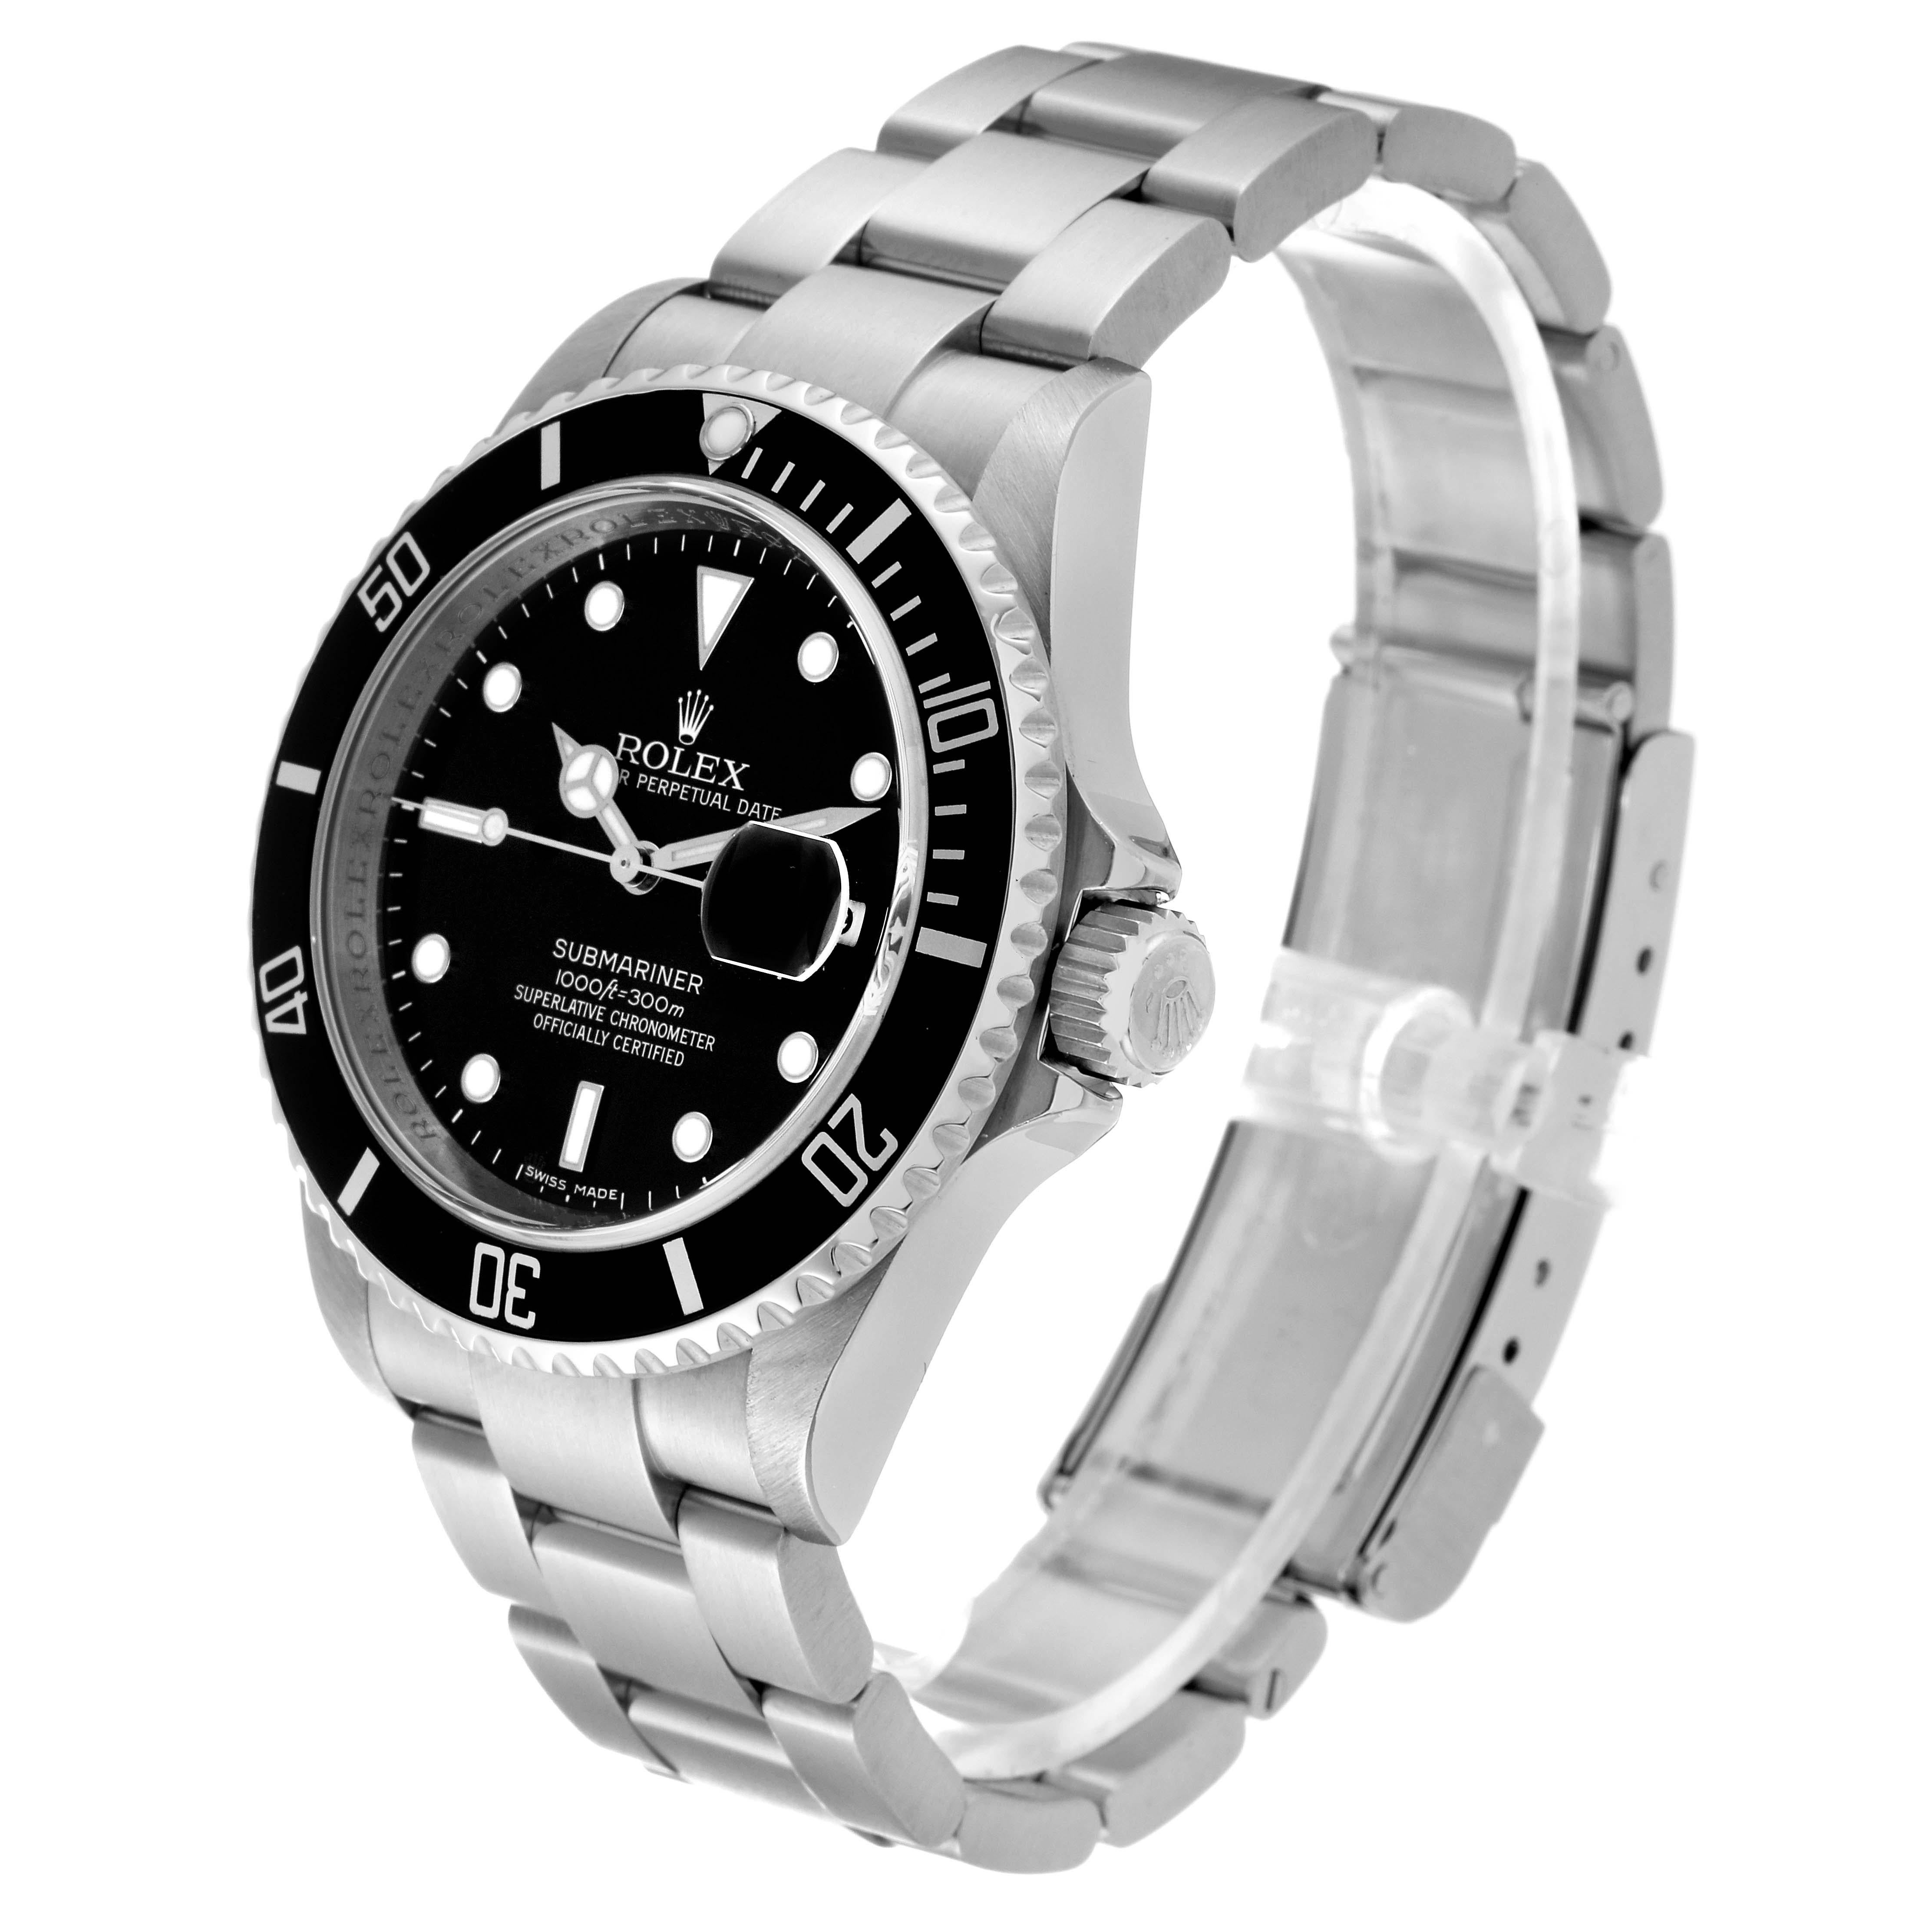 Rolex Submariner Date Black Dial Steel Mens Watch 16610 Box Card For Sale 1